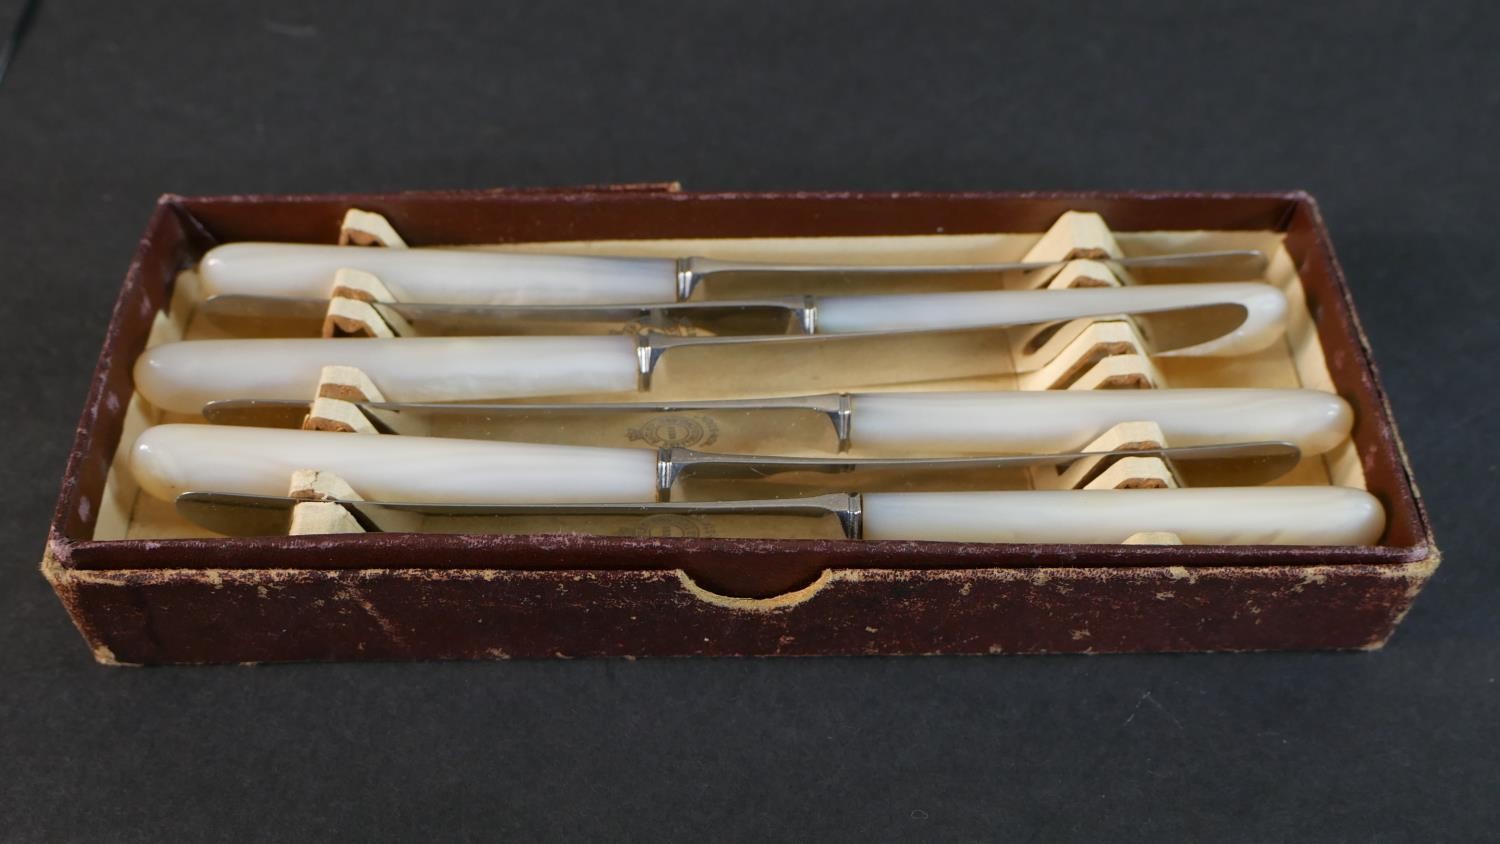 A canteen of fish knives for four people with engraved silver plated blades along with a box of - Image 2 of 9